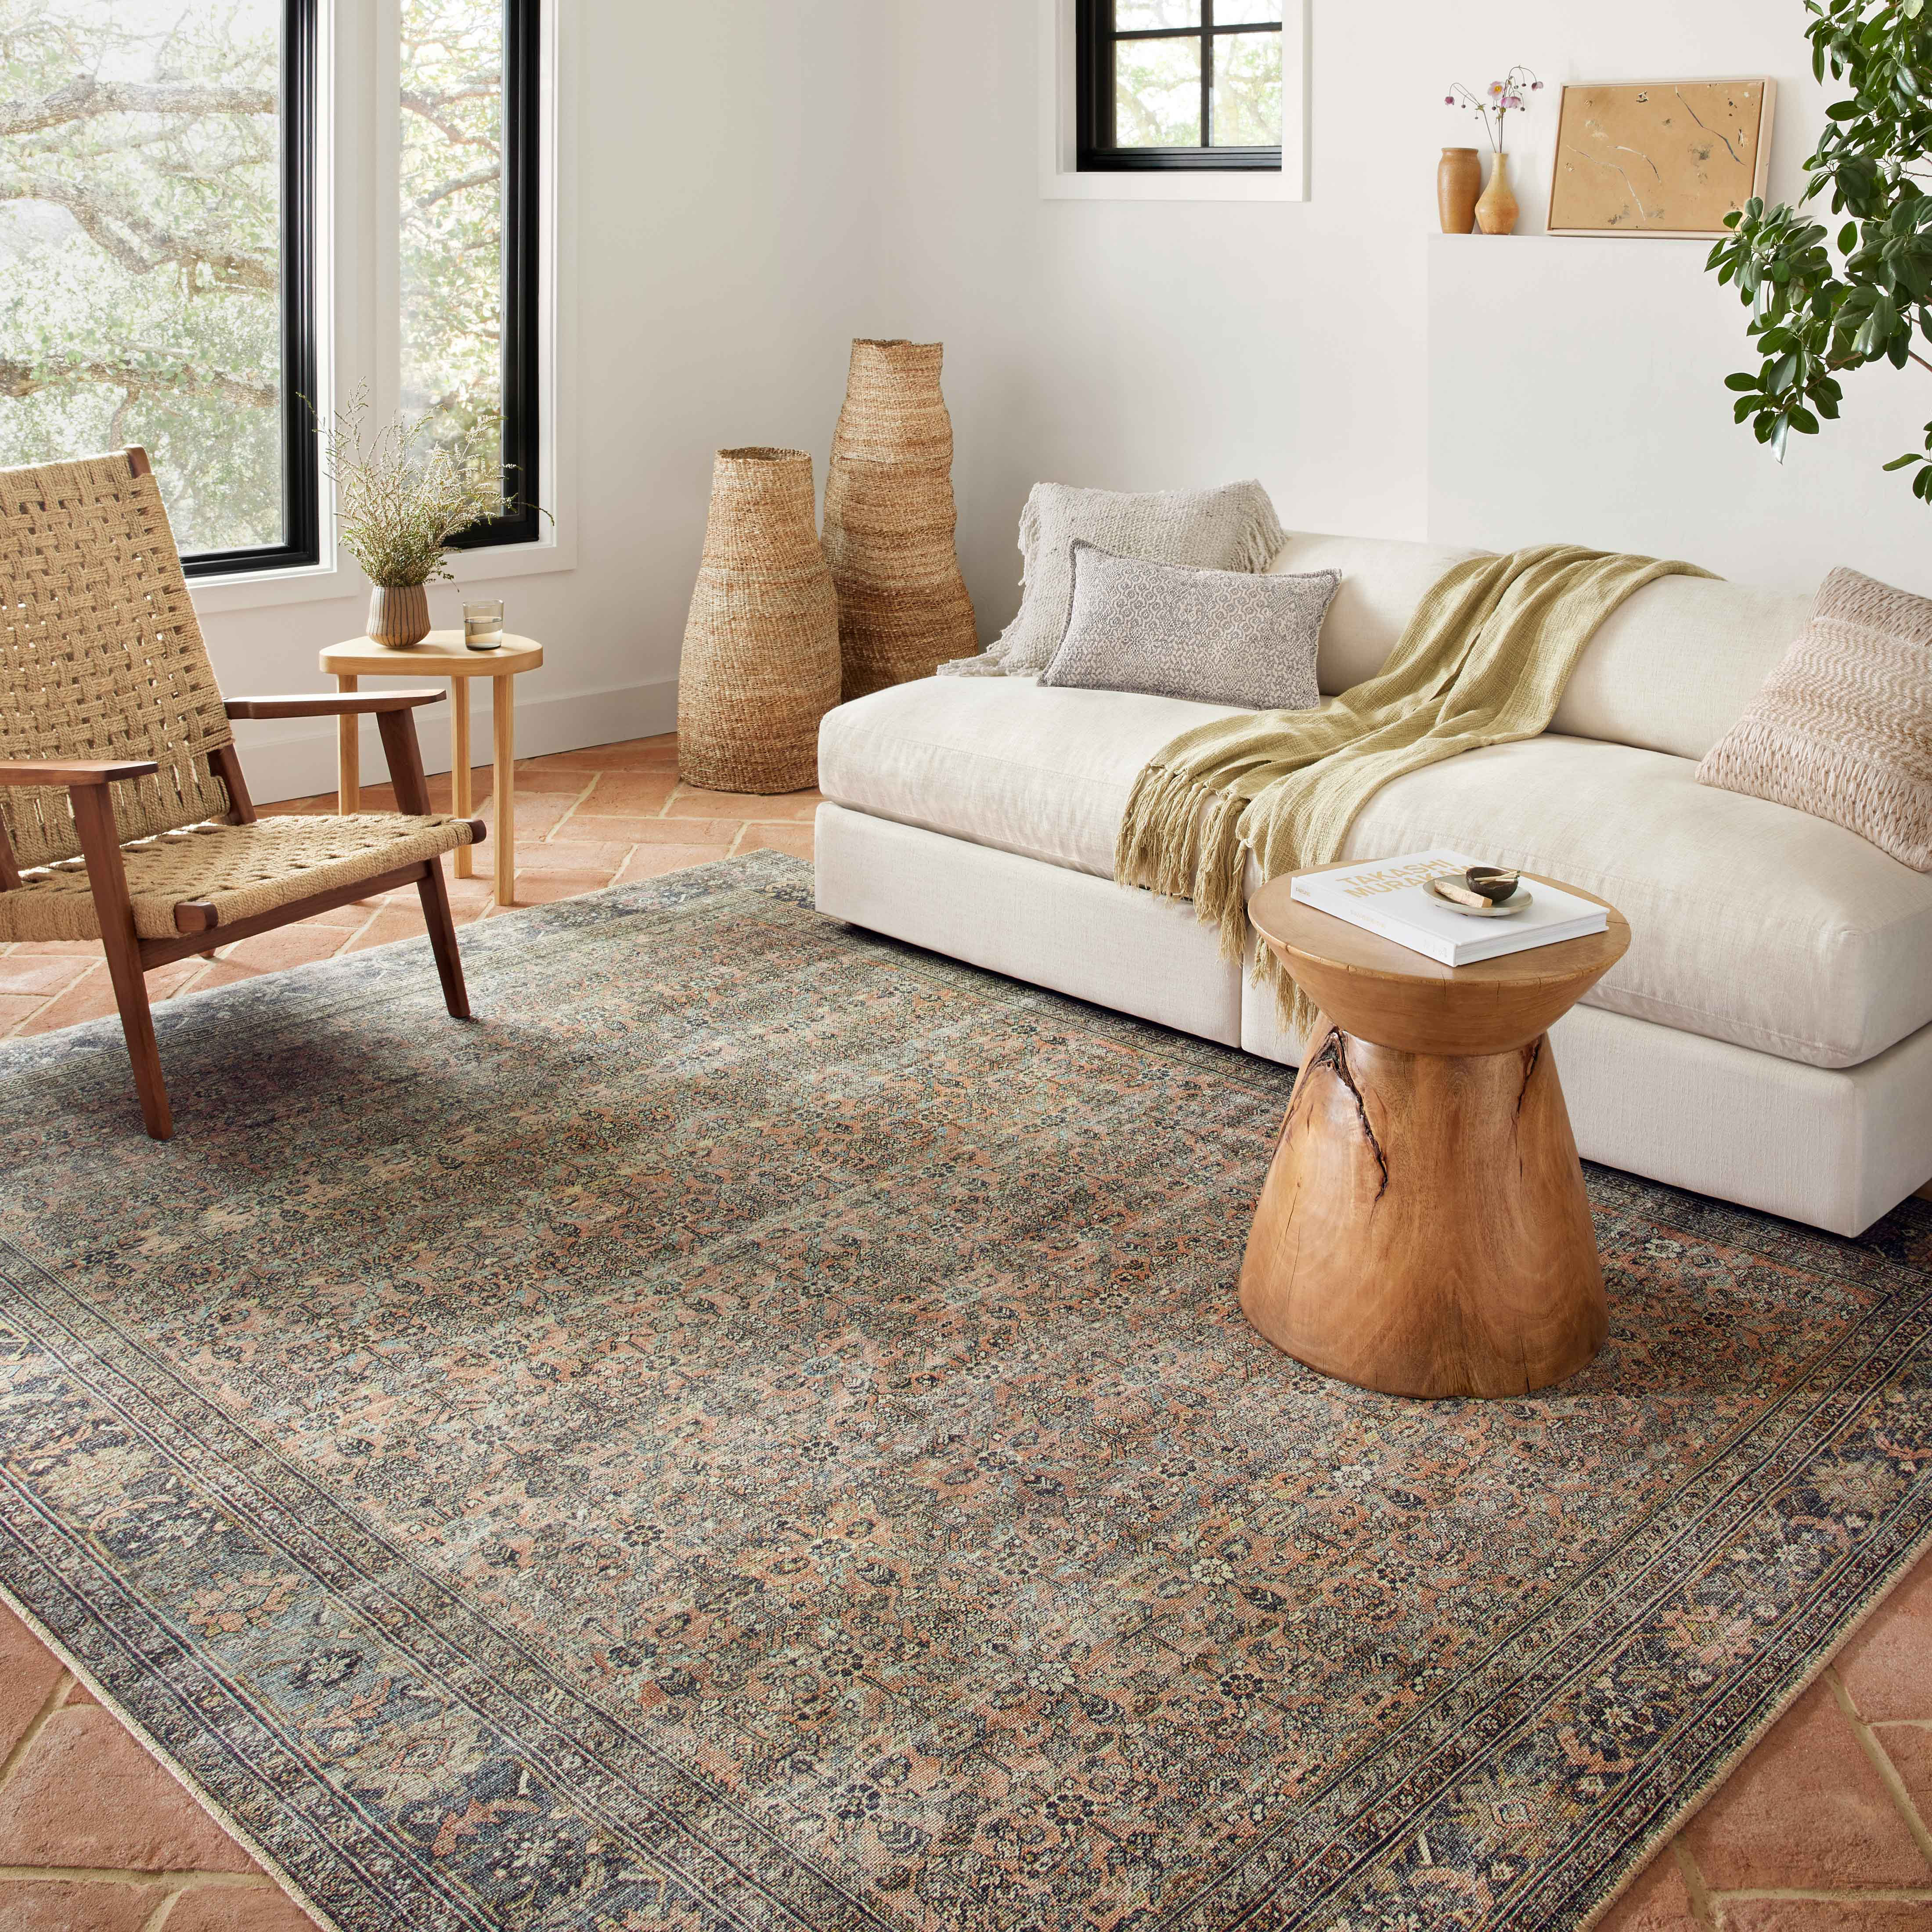 Limited Time Promotional Traditional Turkish Kilim Terracotta  Beige Area Rug 